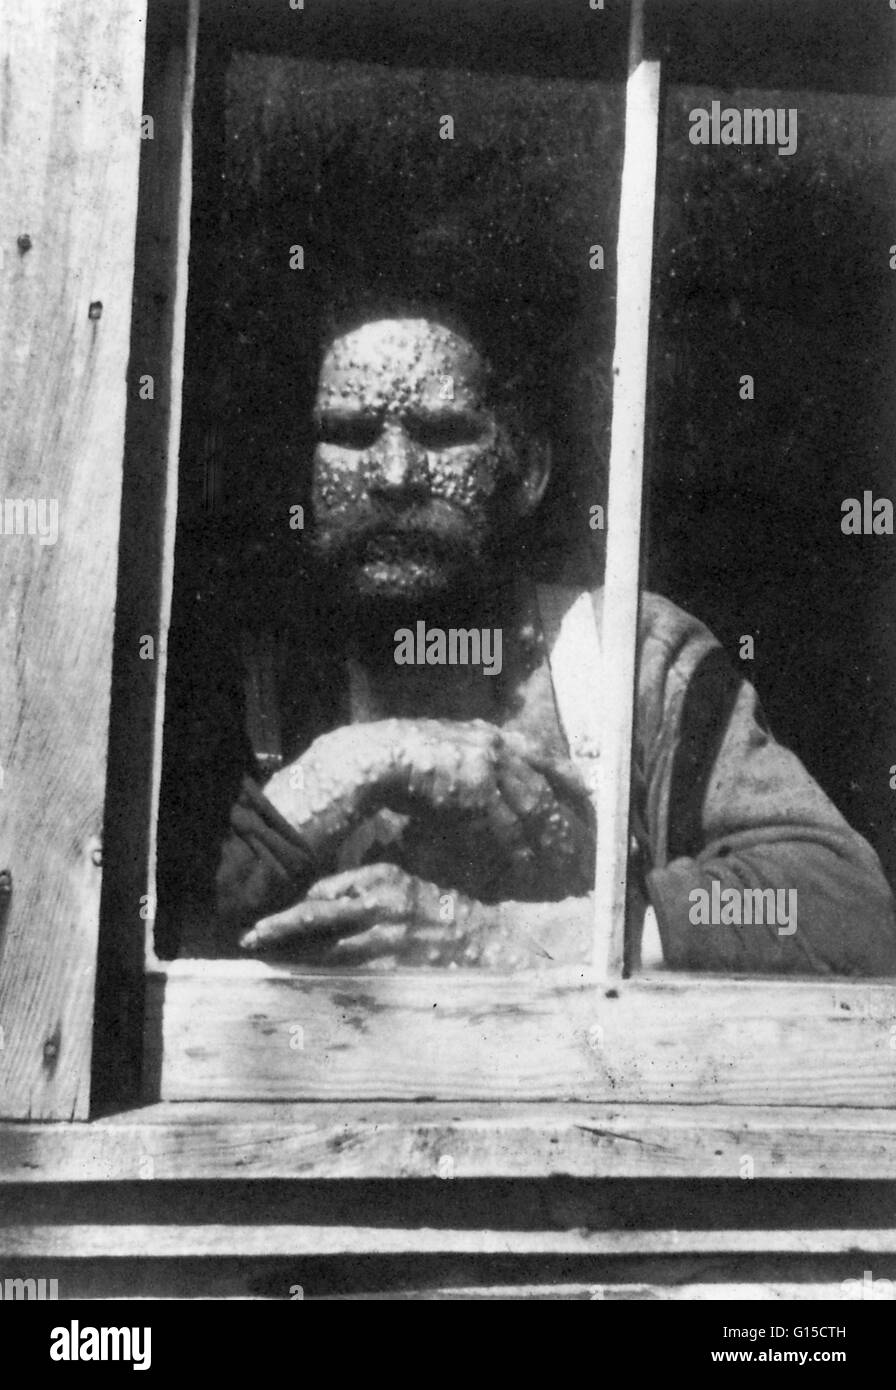 Man with Smallpox in isolation, 1890. Smallpox is an acute, infectious viral disease transmitted by direct contact with infected people. Fever symptoms commence 8-18 days after exposure. After 3 days, red spots appear on the face and body and develop into Stock Photo